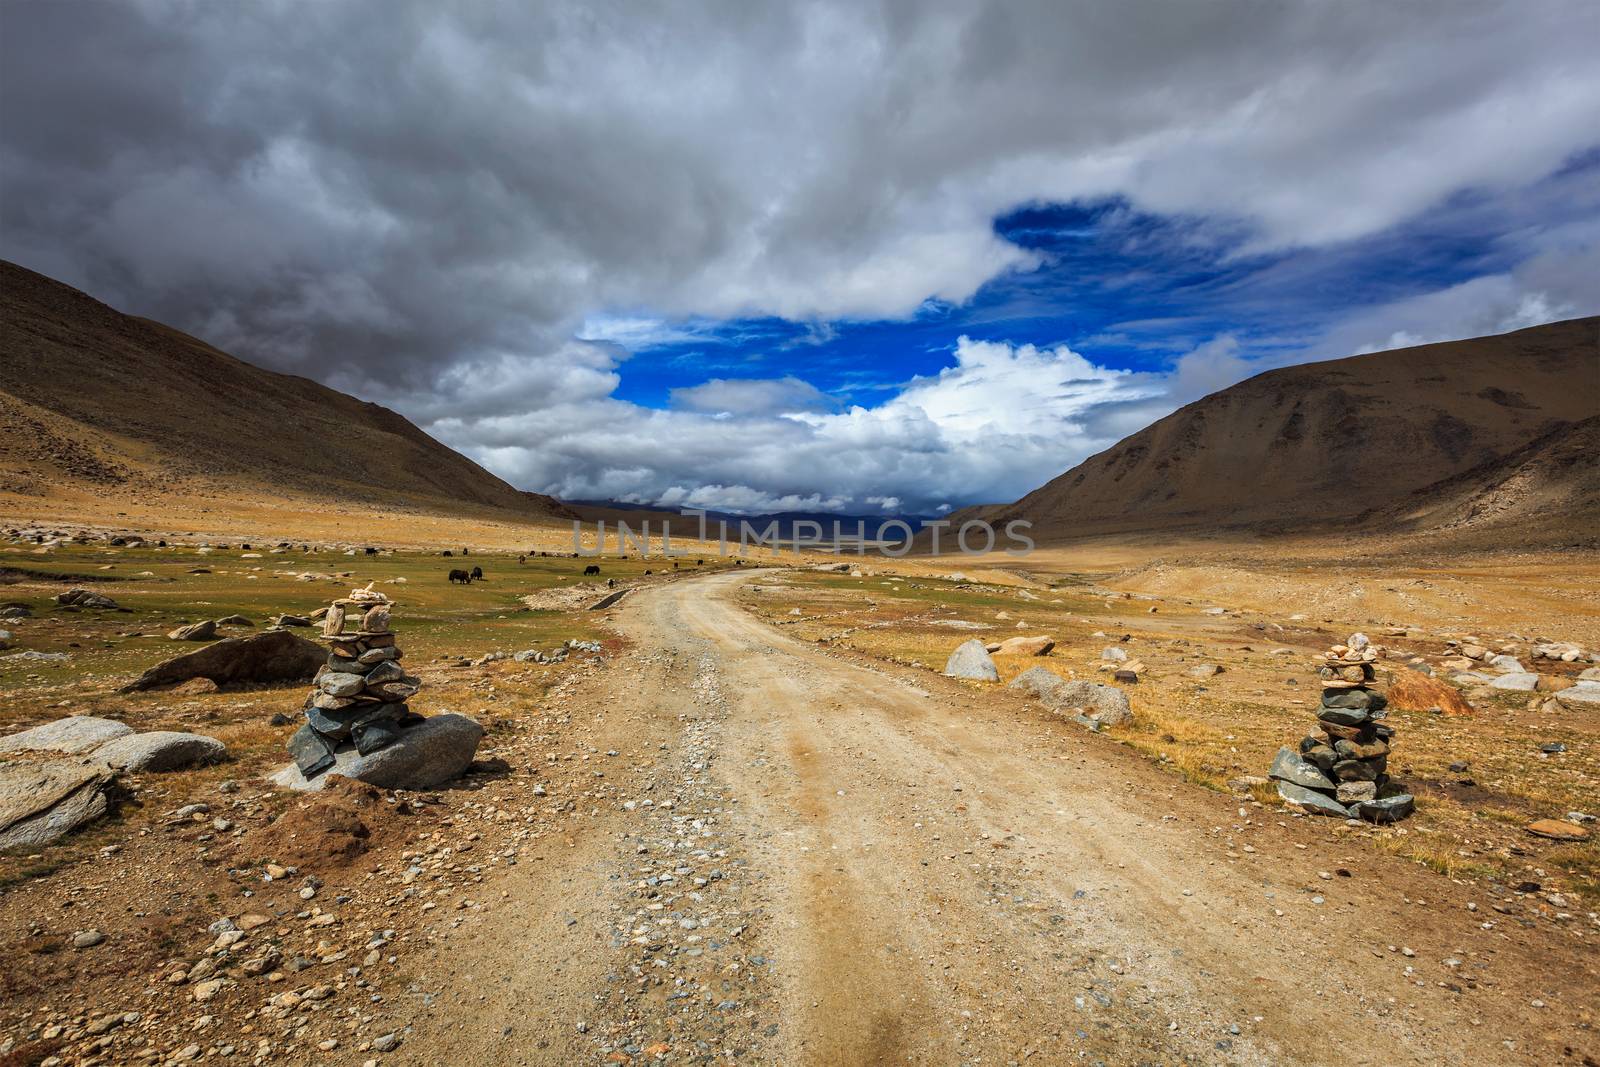 Road in Himalayas with stone cairns. Ladakh, Jammu and Kashmir, India